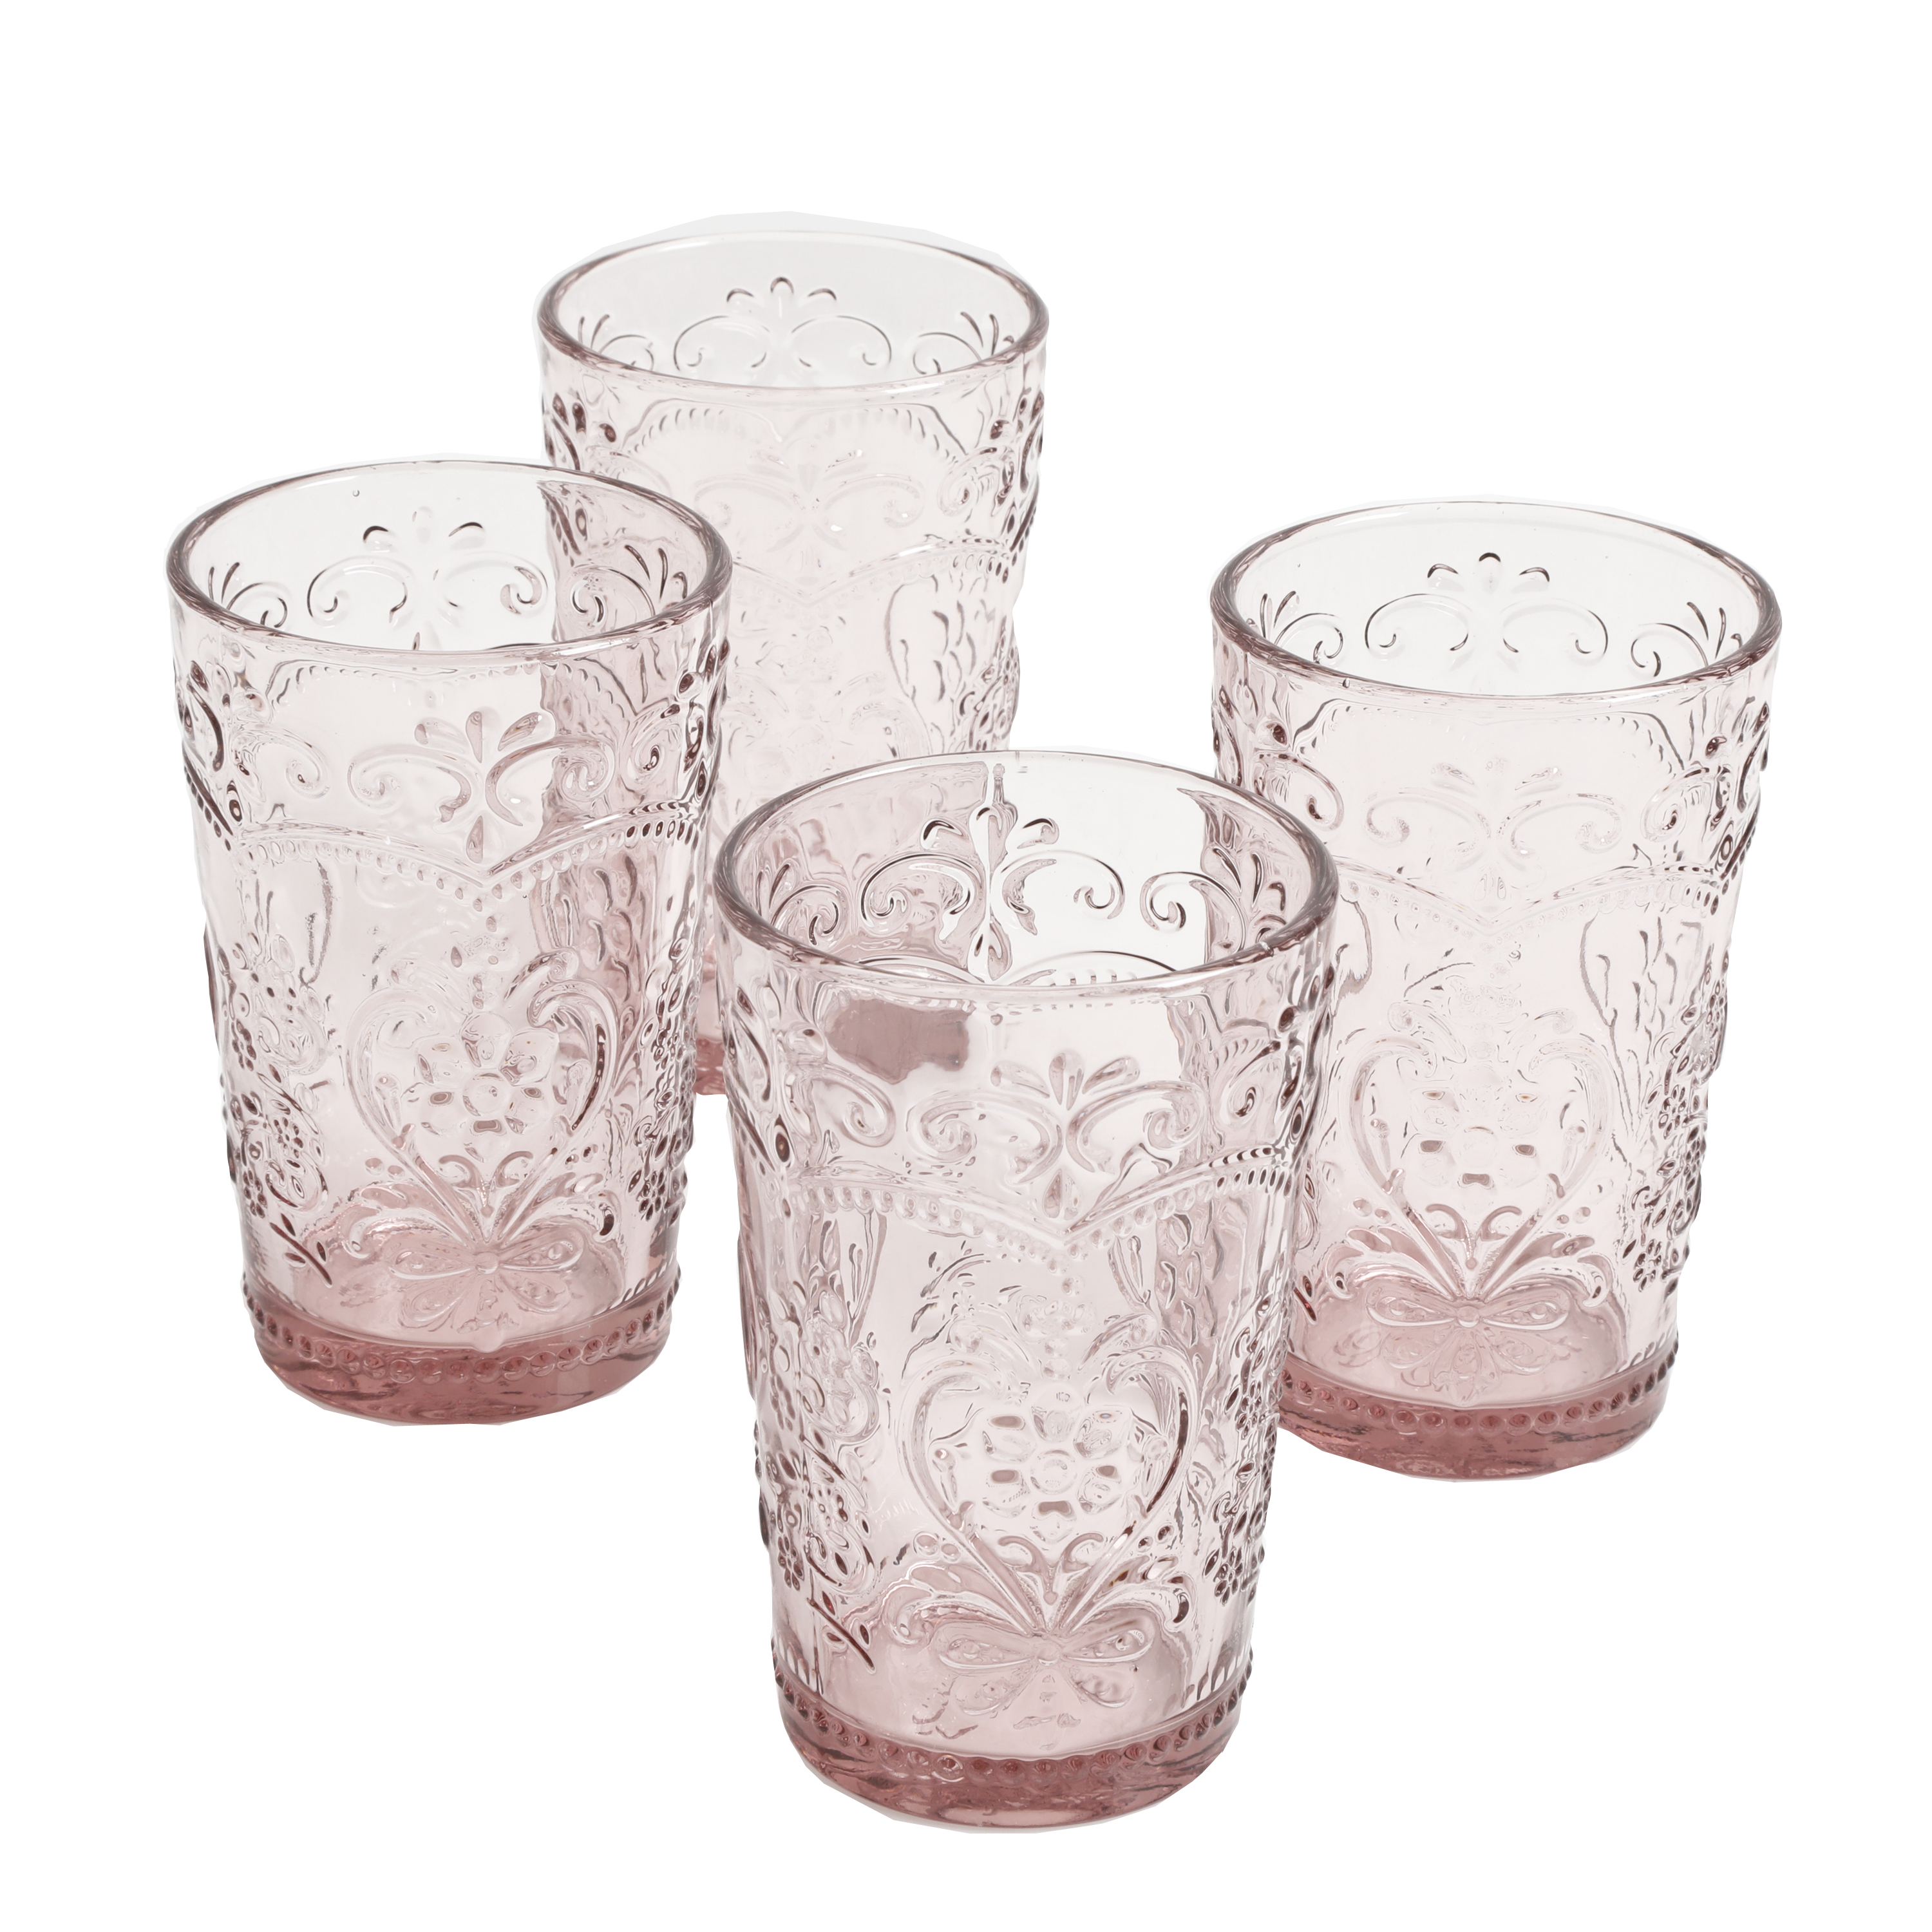 The Pioneer Woman Amelia Pink 15.22-Ounce Glass Tumblers, Set of 4 - image 1 of 4